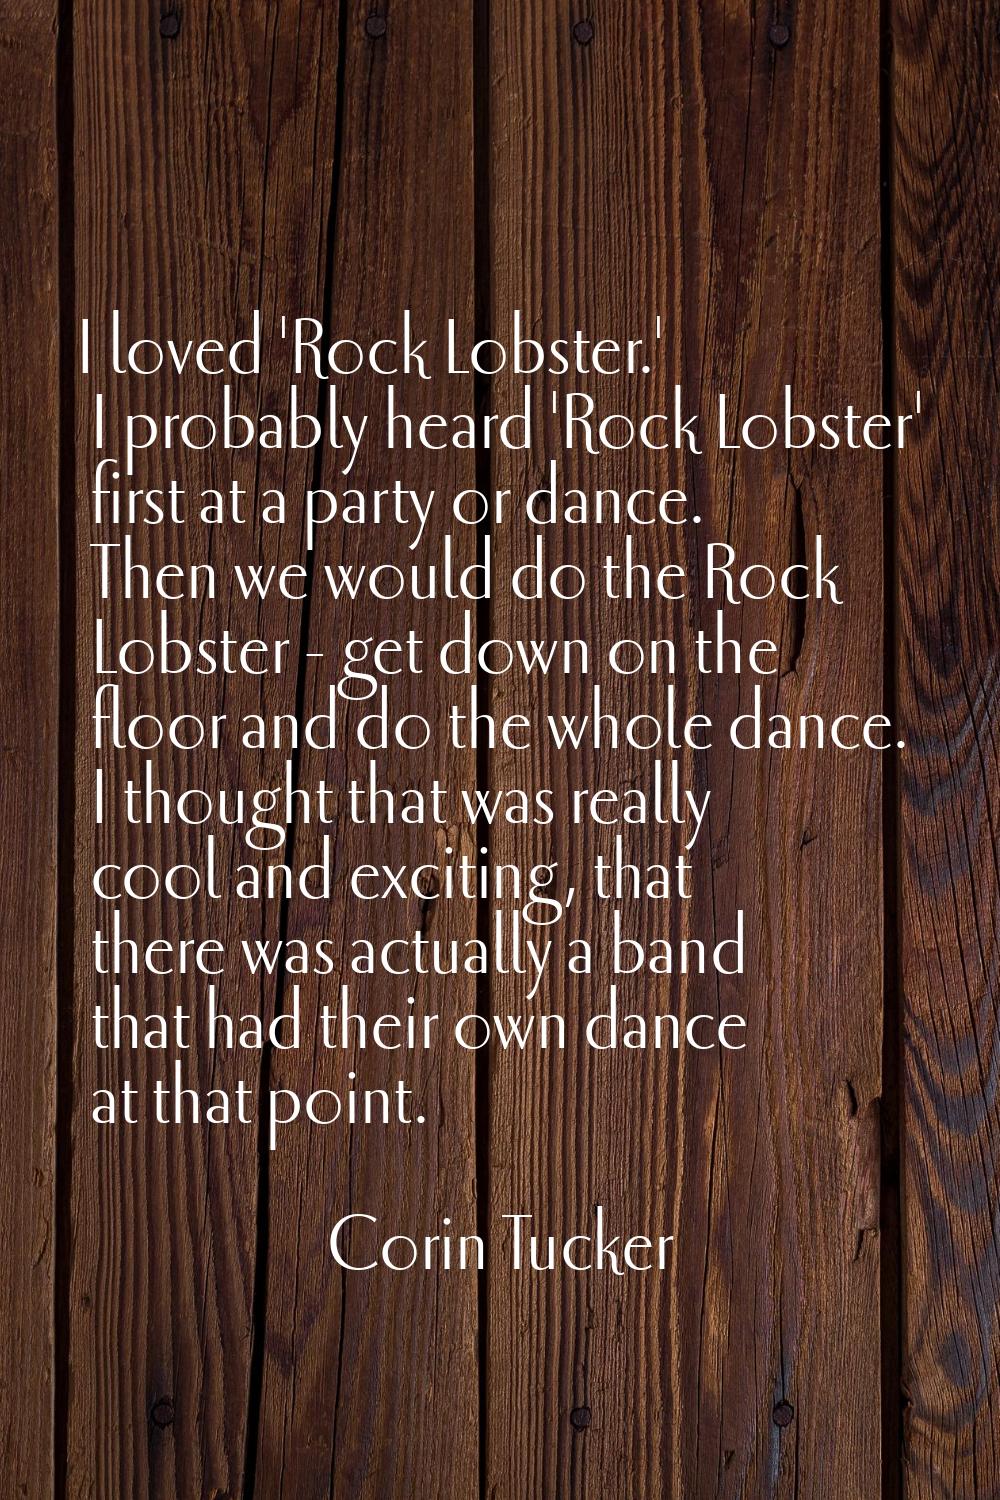 I loved 'Rock Lobster.' I probably heard 'Rock Lobster' first at a party or dance. Then we would do